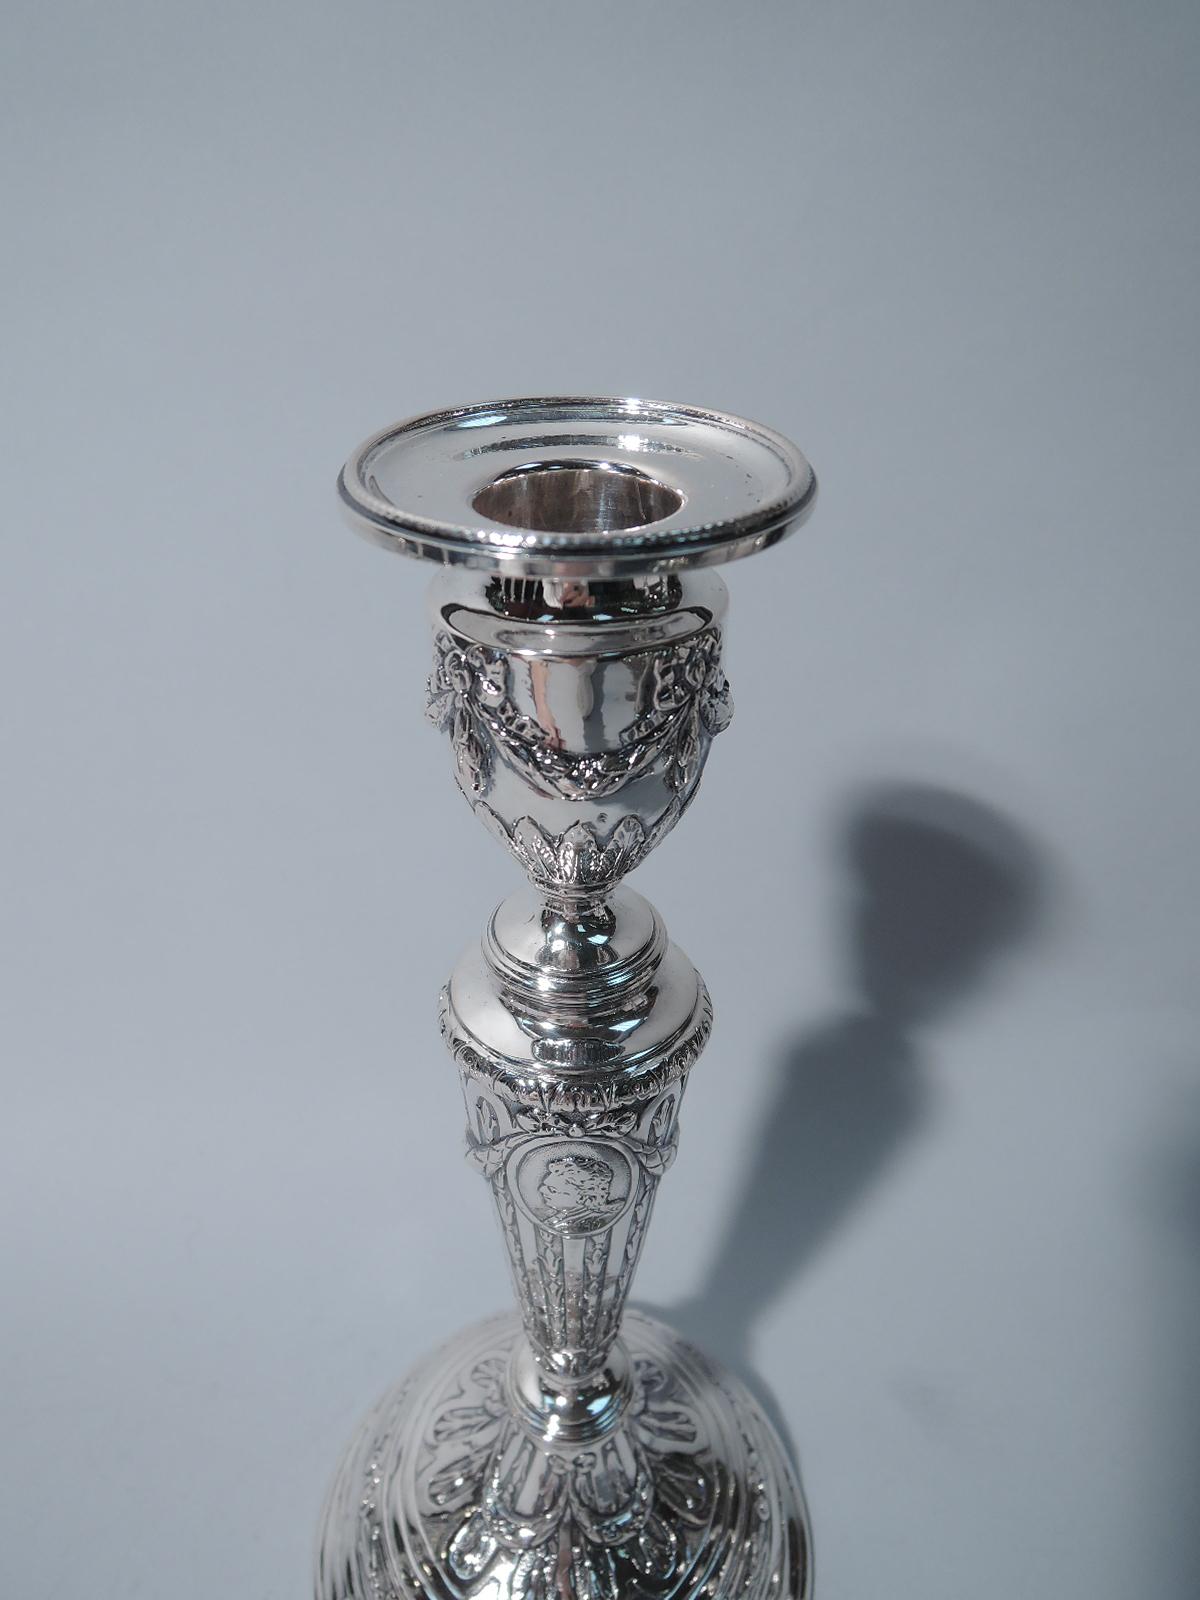 Set of 4 German 800 silver candlesticks, circa 1900. Each: tapering columnar shaft on knopped and domed foot. Urn socket with detachable bobeche. Raised ornament: gadroons inset with stylized flowers, foliage, bow-tied swags, and frames with